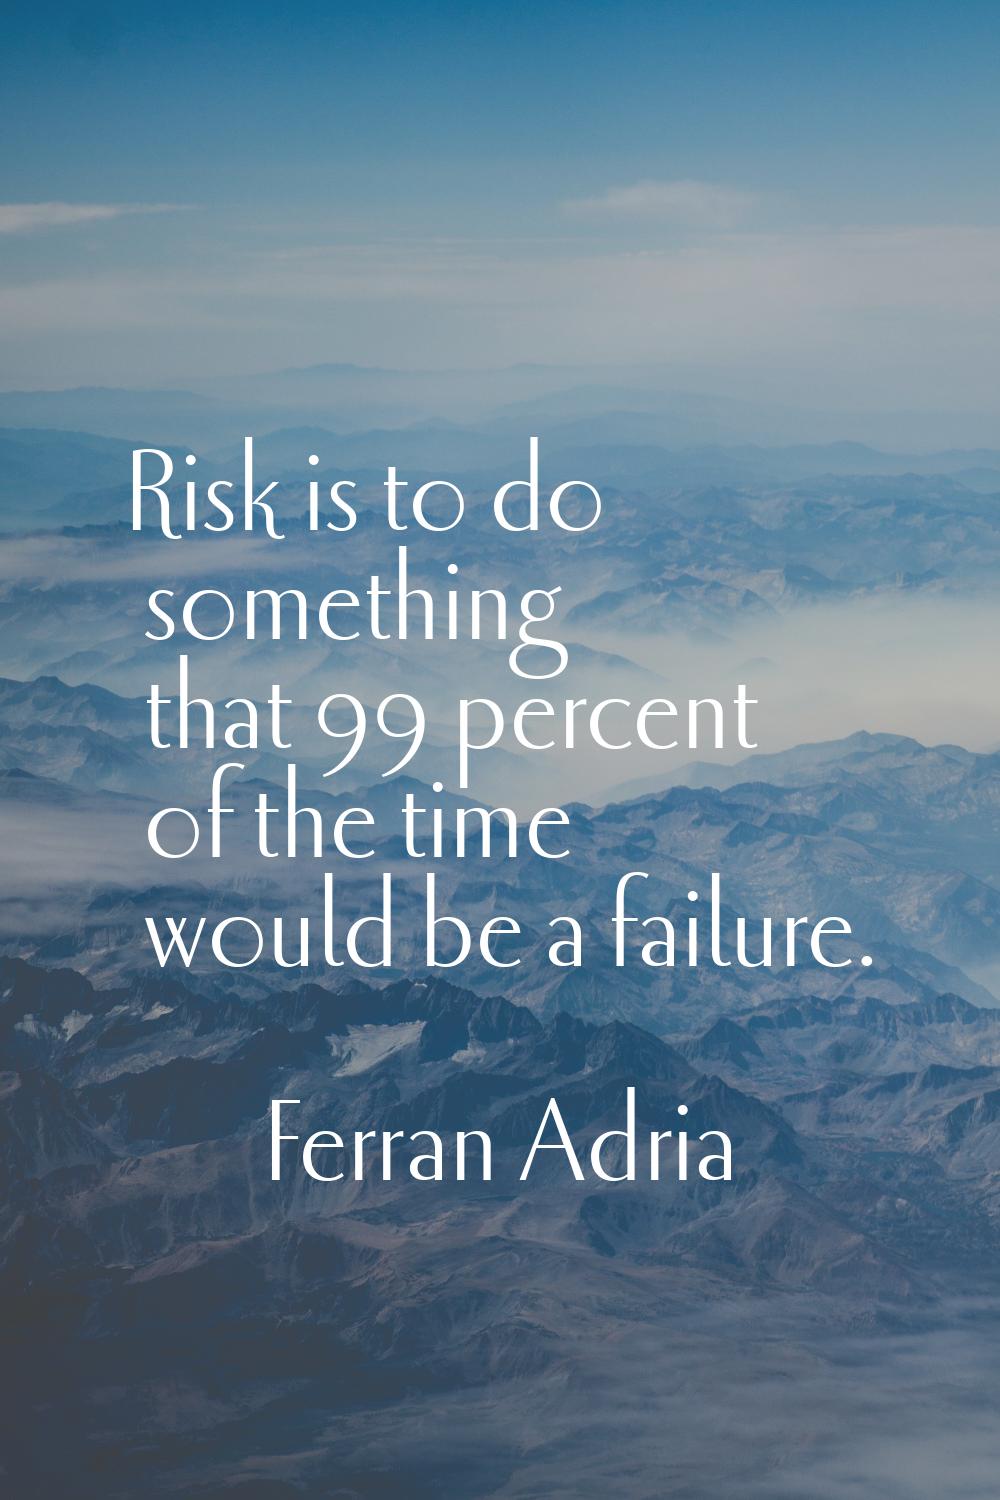 Risk is to do something that 99 percent of the time would be a failure.